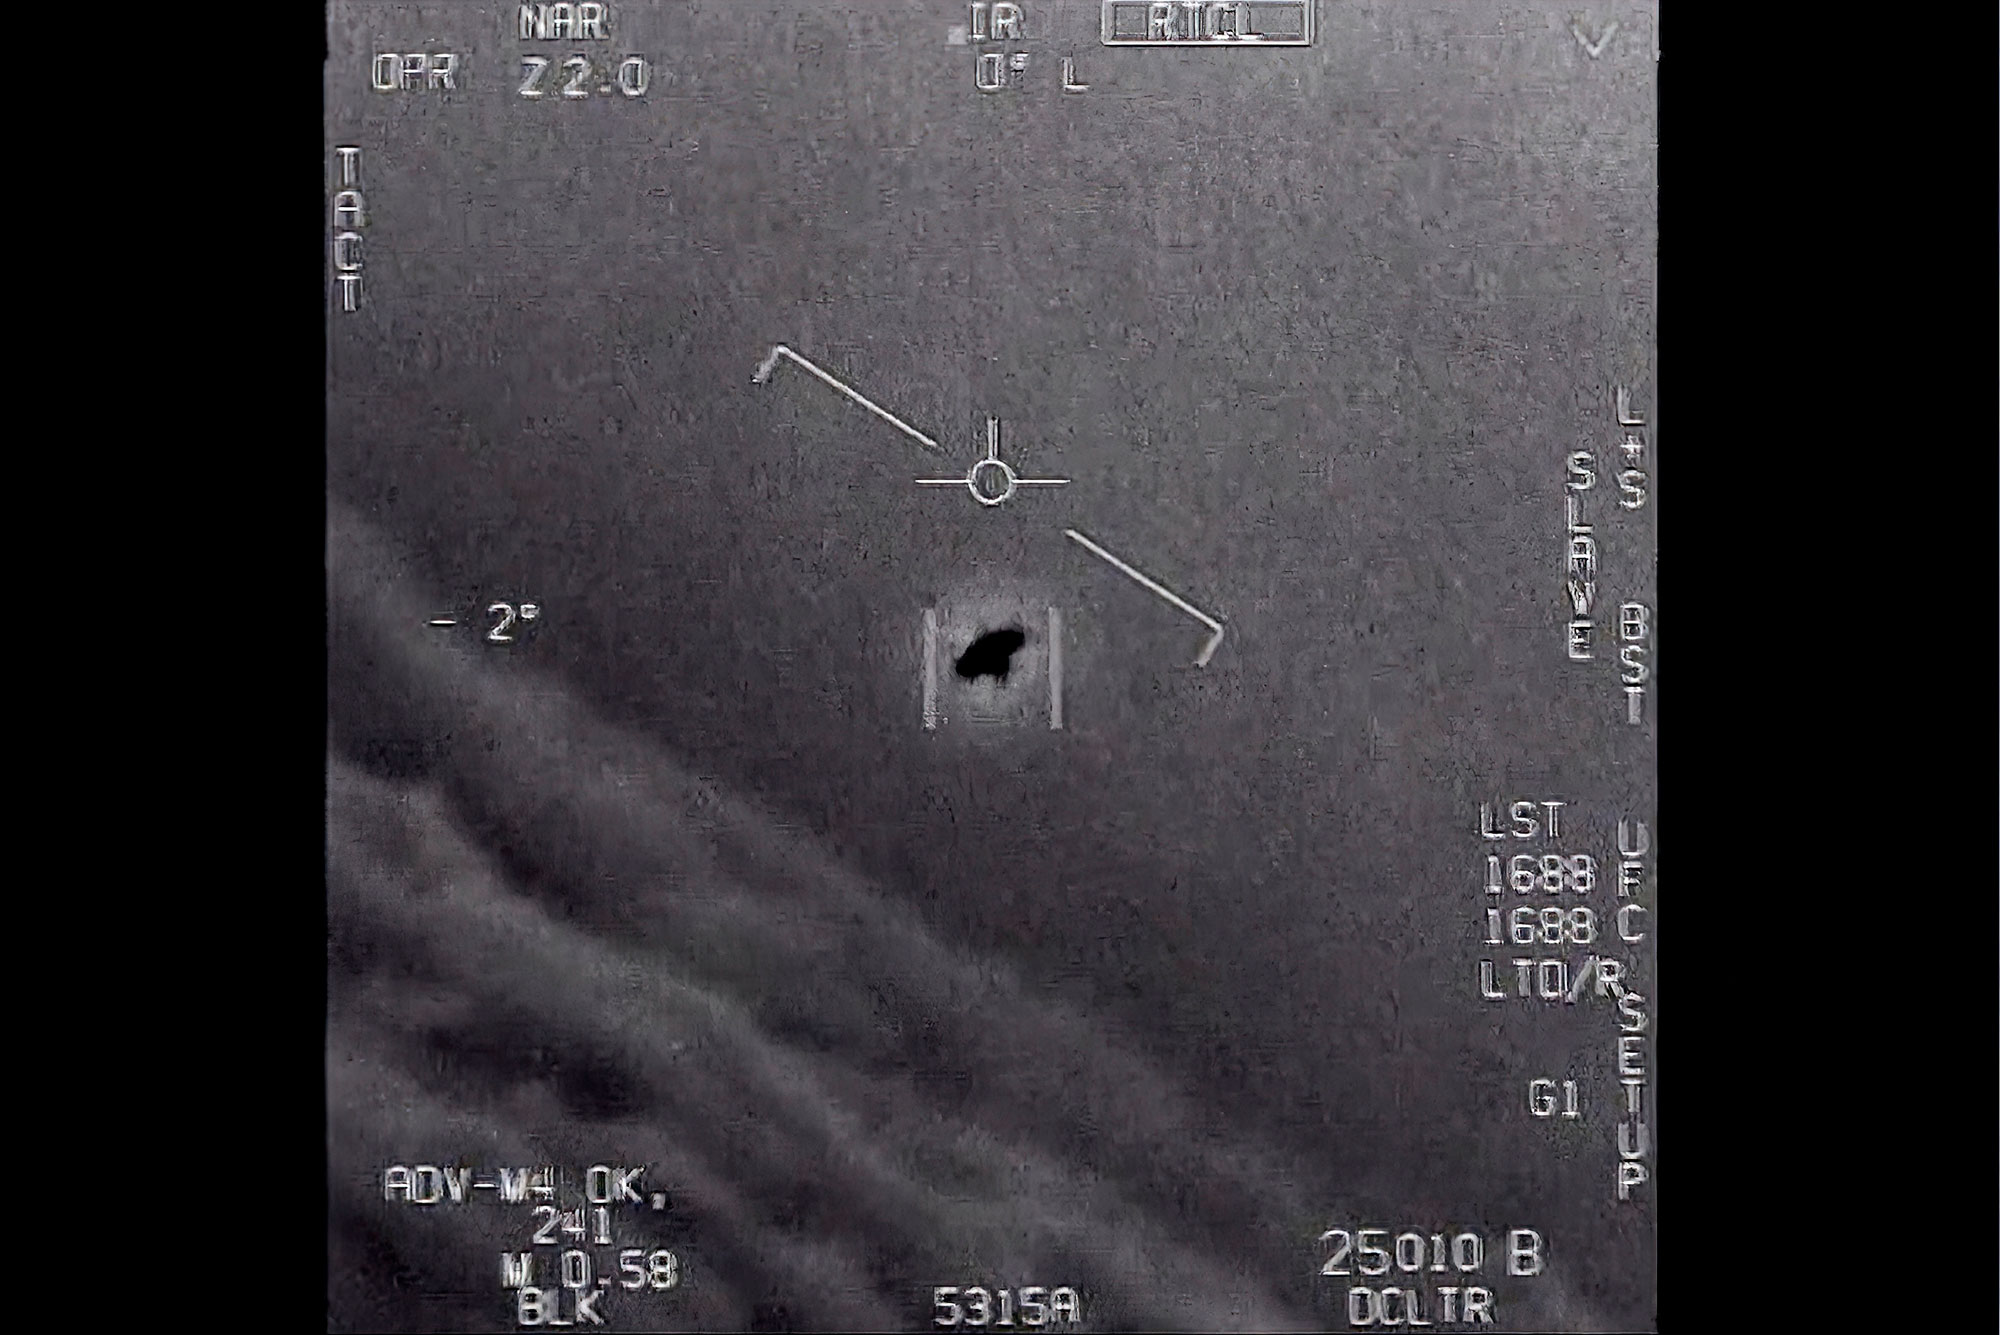 Government UFO Report Won't Rule Out Visitors from Space, BU Today